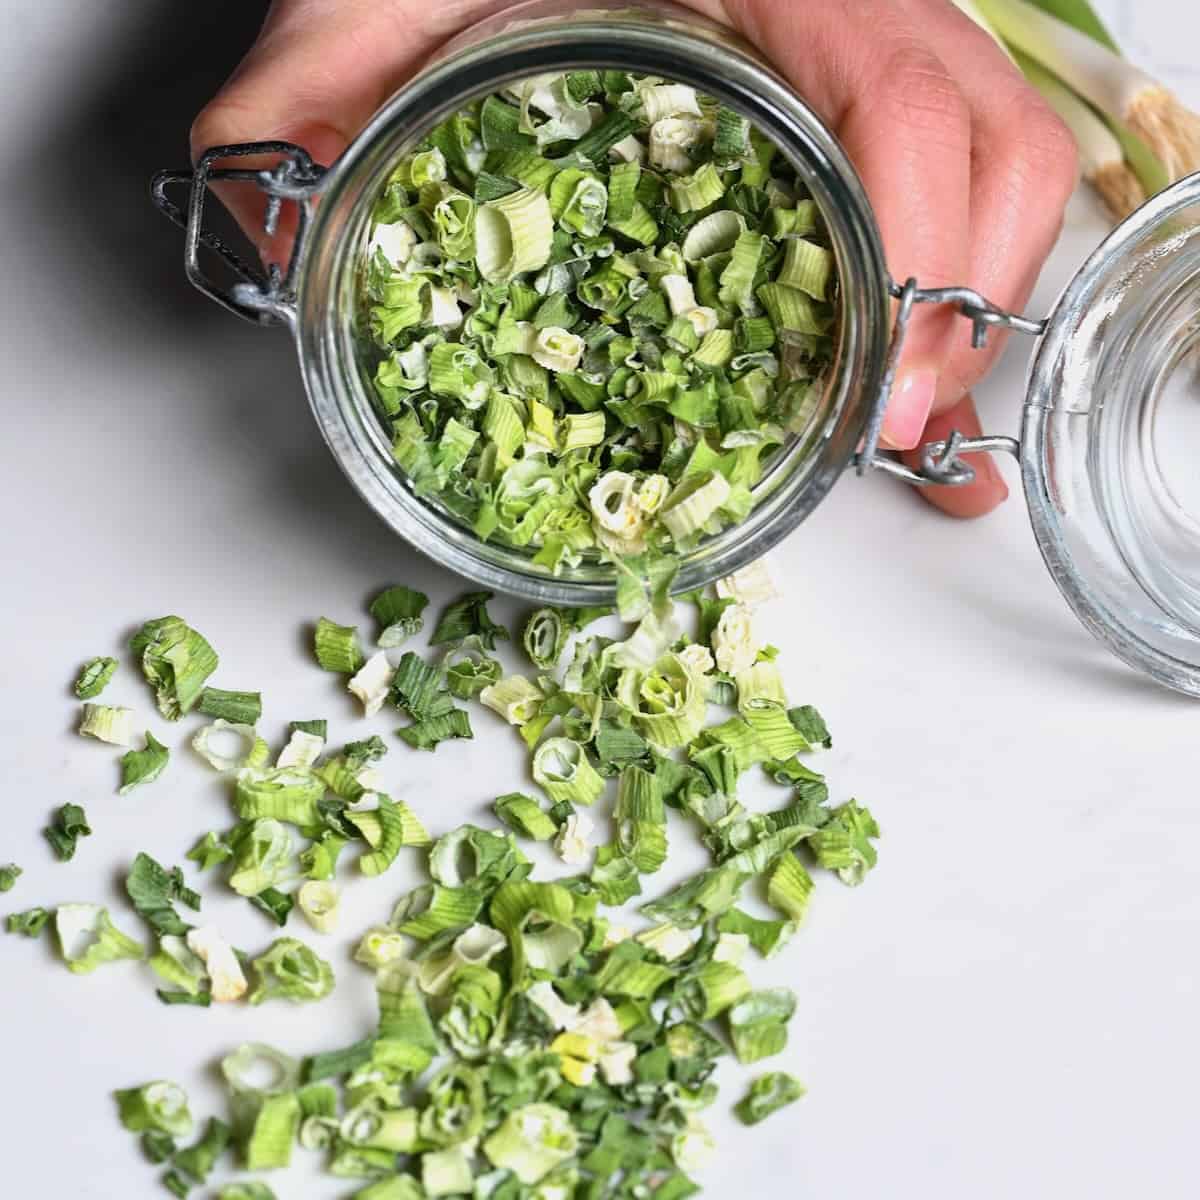 https://www.alphafoodie.com/wp-content/uploads/2023/02/How-to-dry-green-onions-square.jpeg